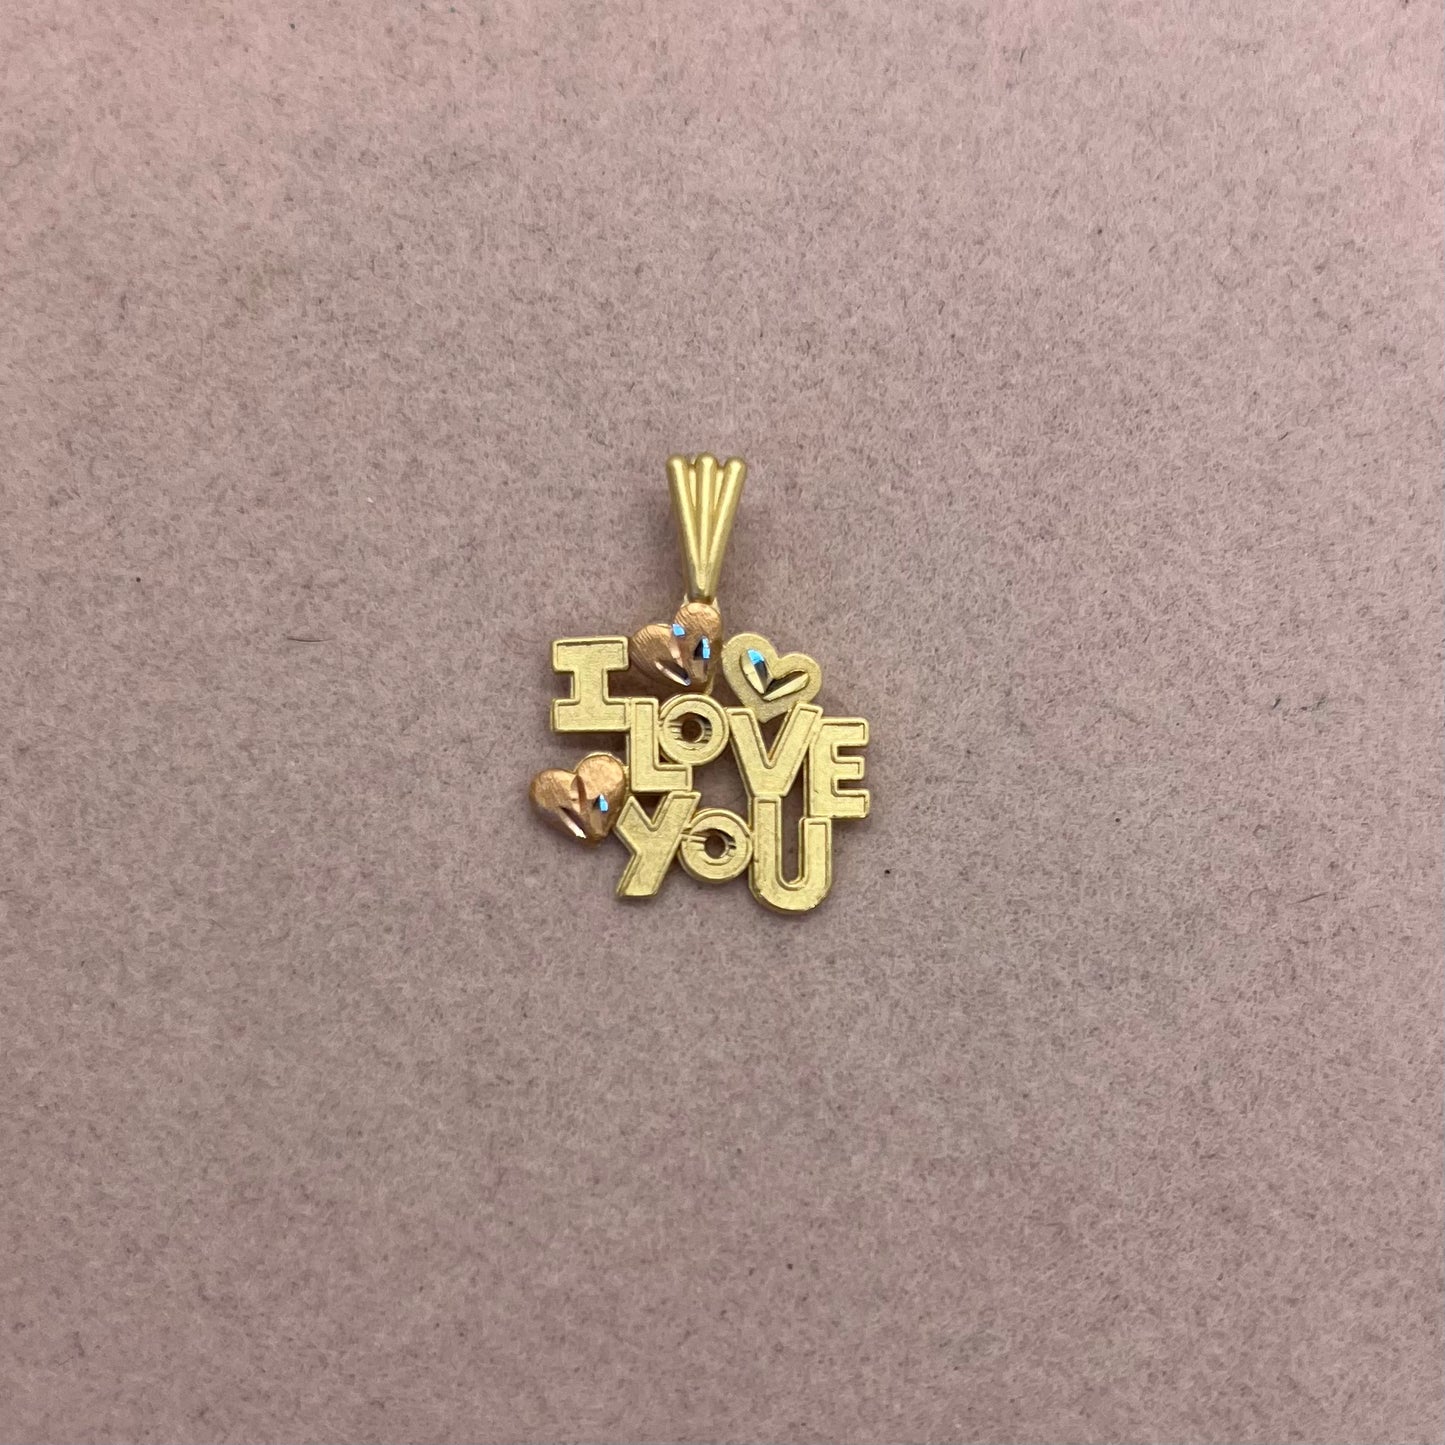 'I Love You' Heart Pendant by Michael Anthony (1989)